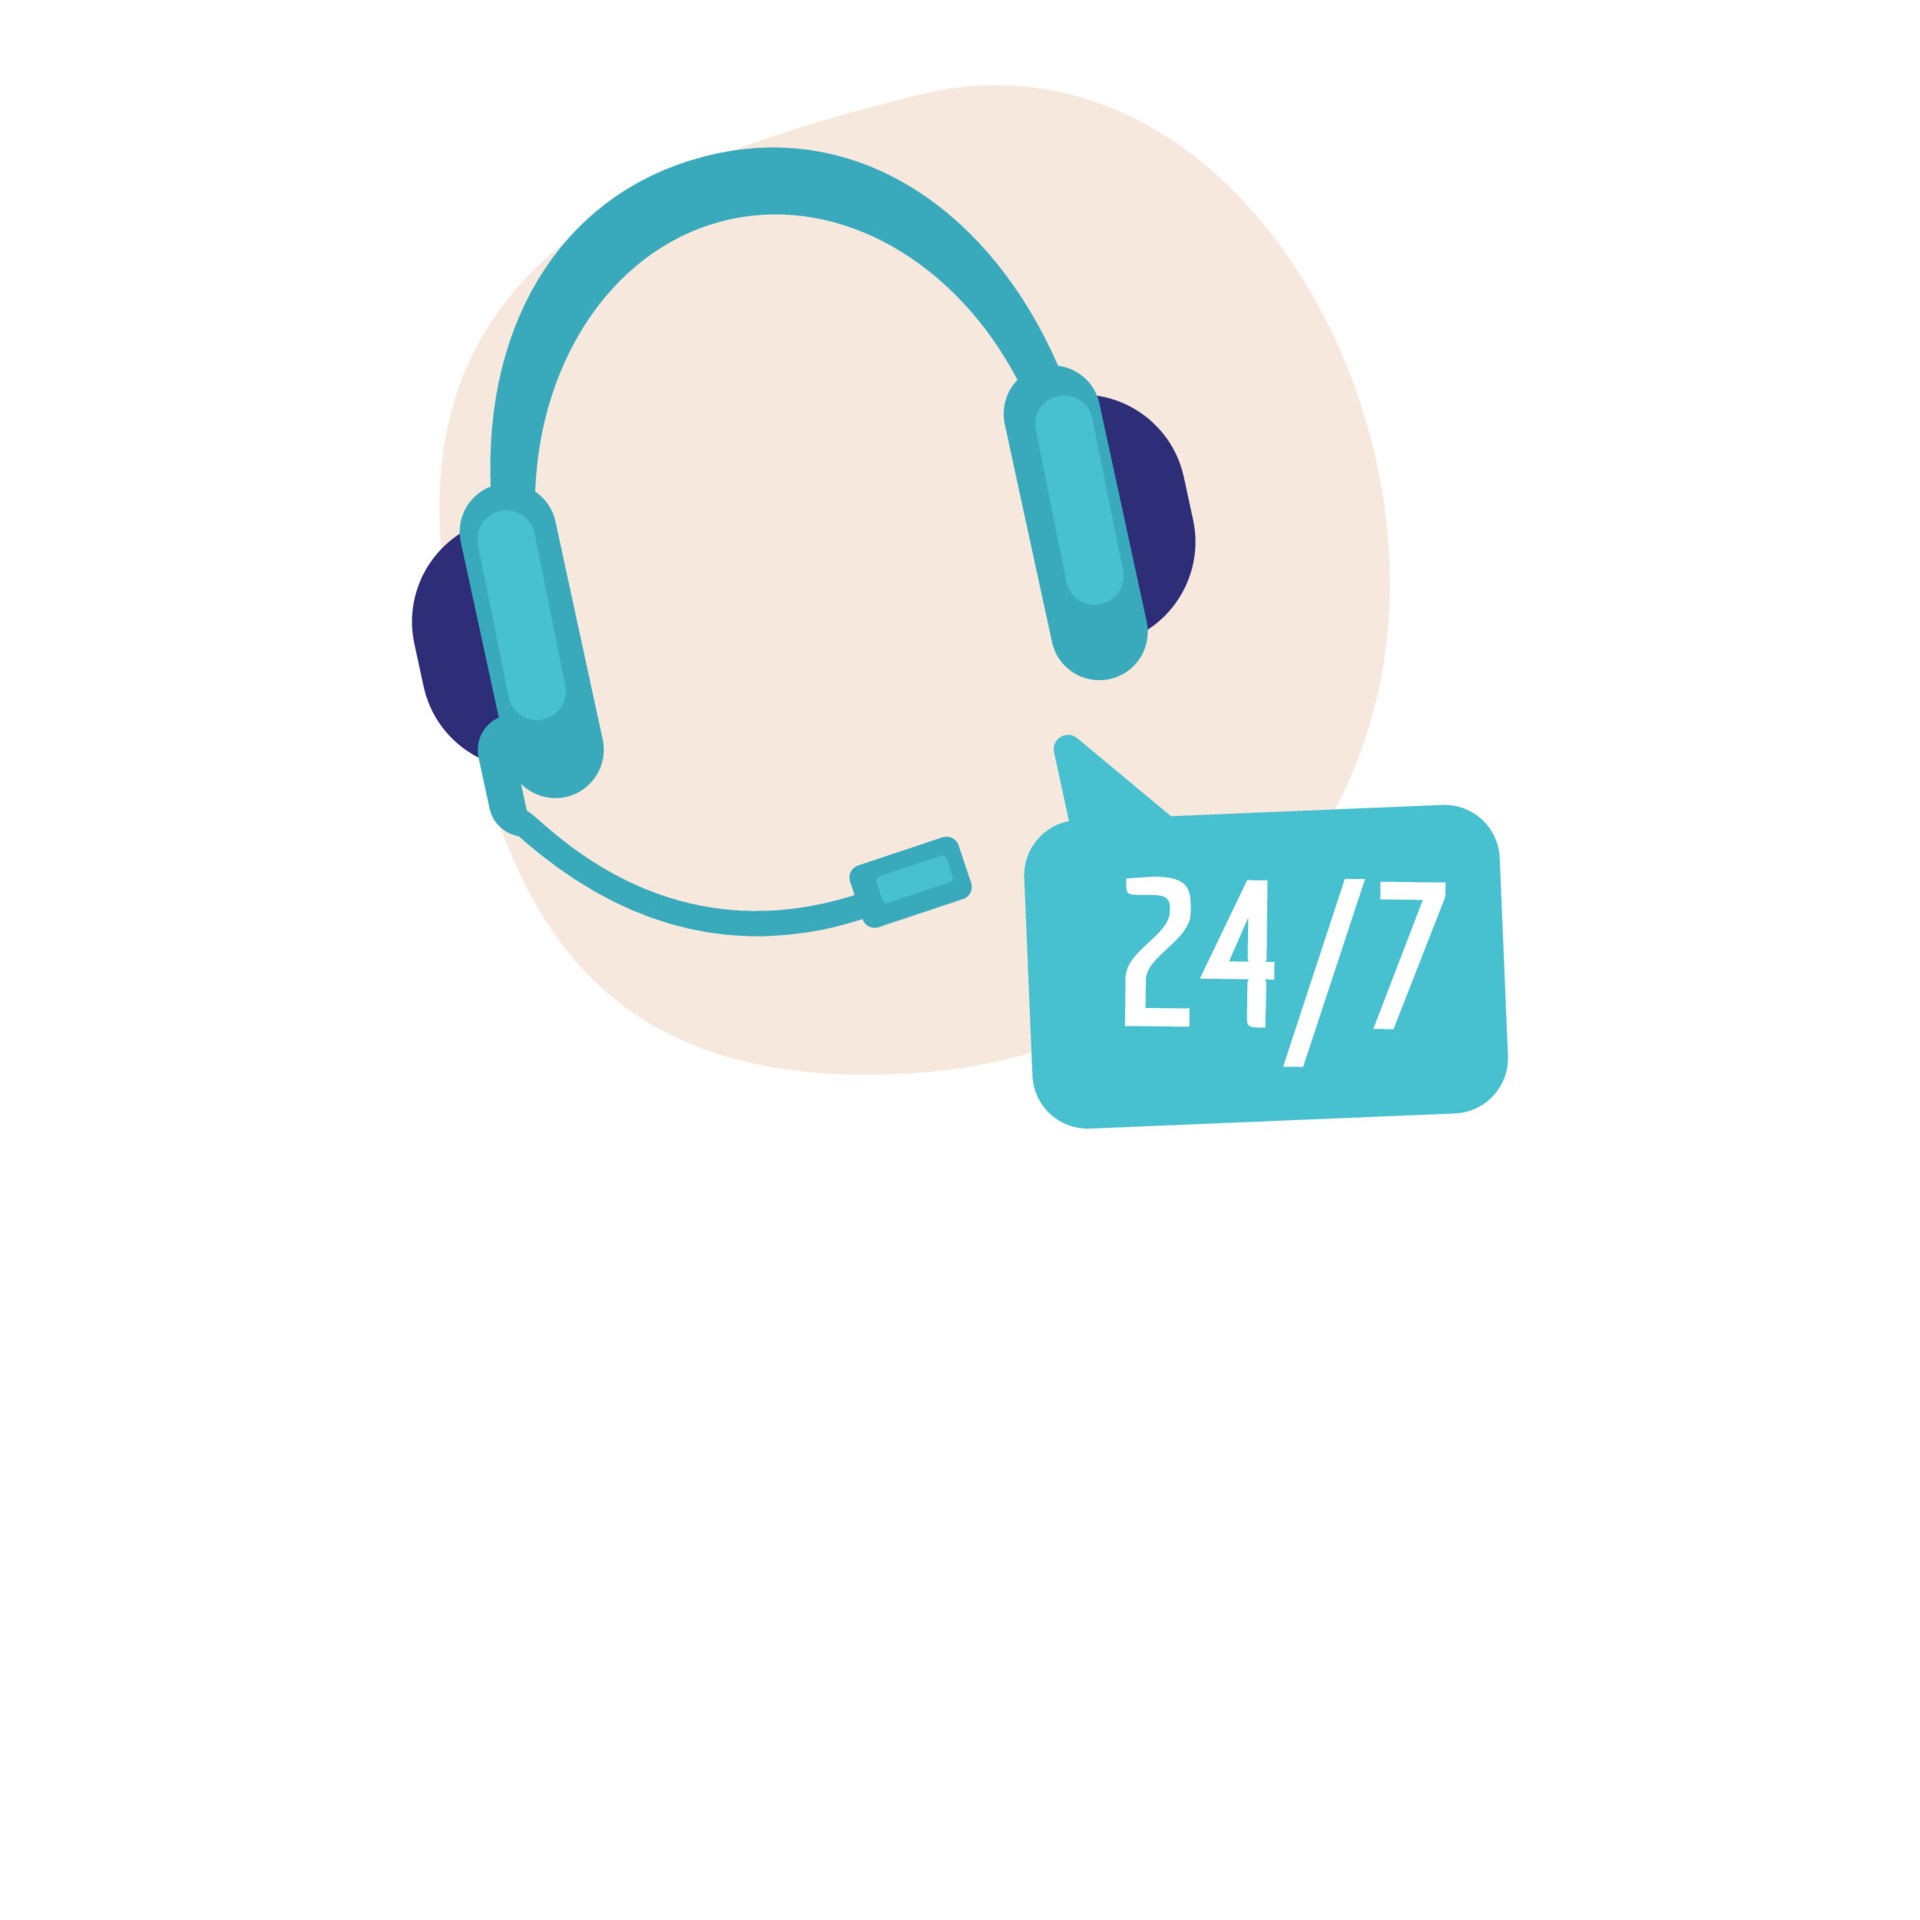 24/7 icon with headset